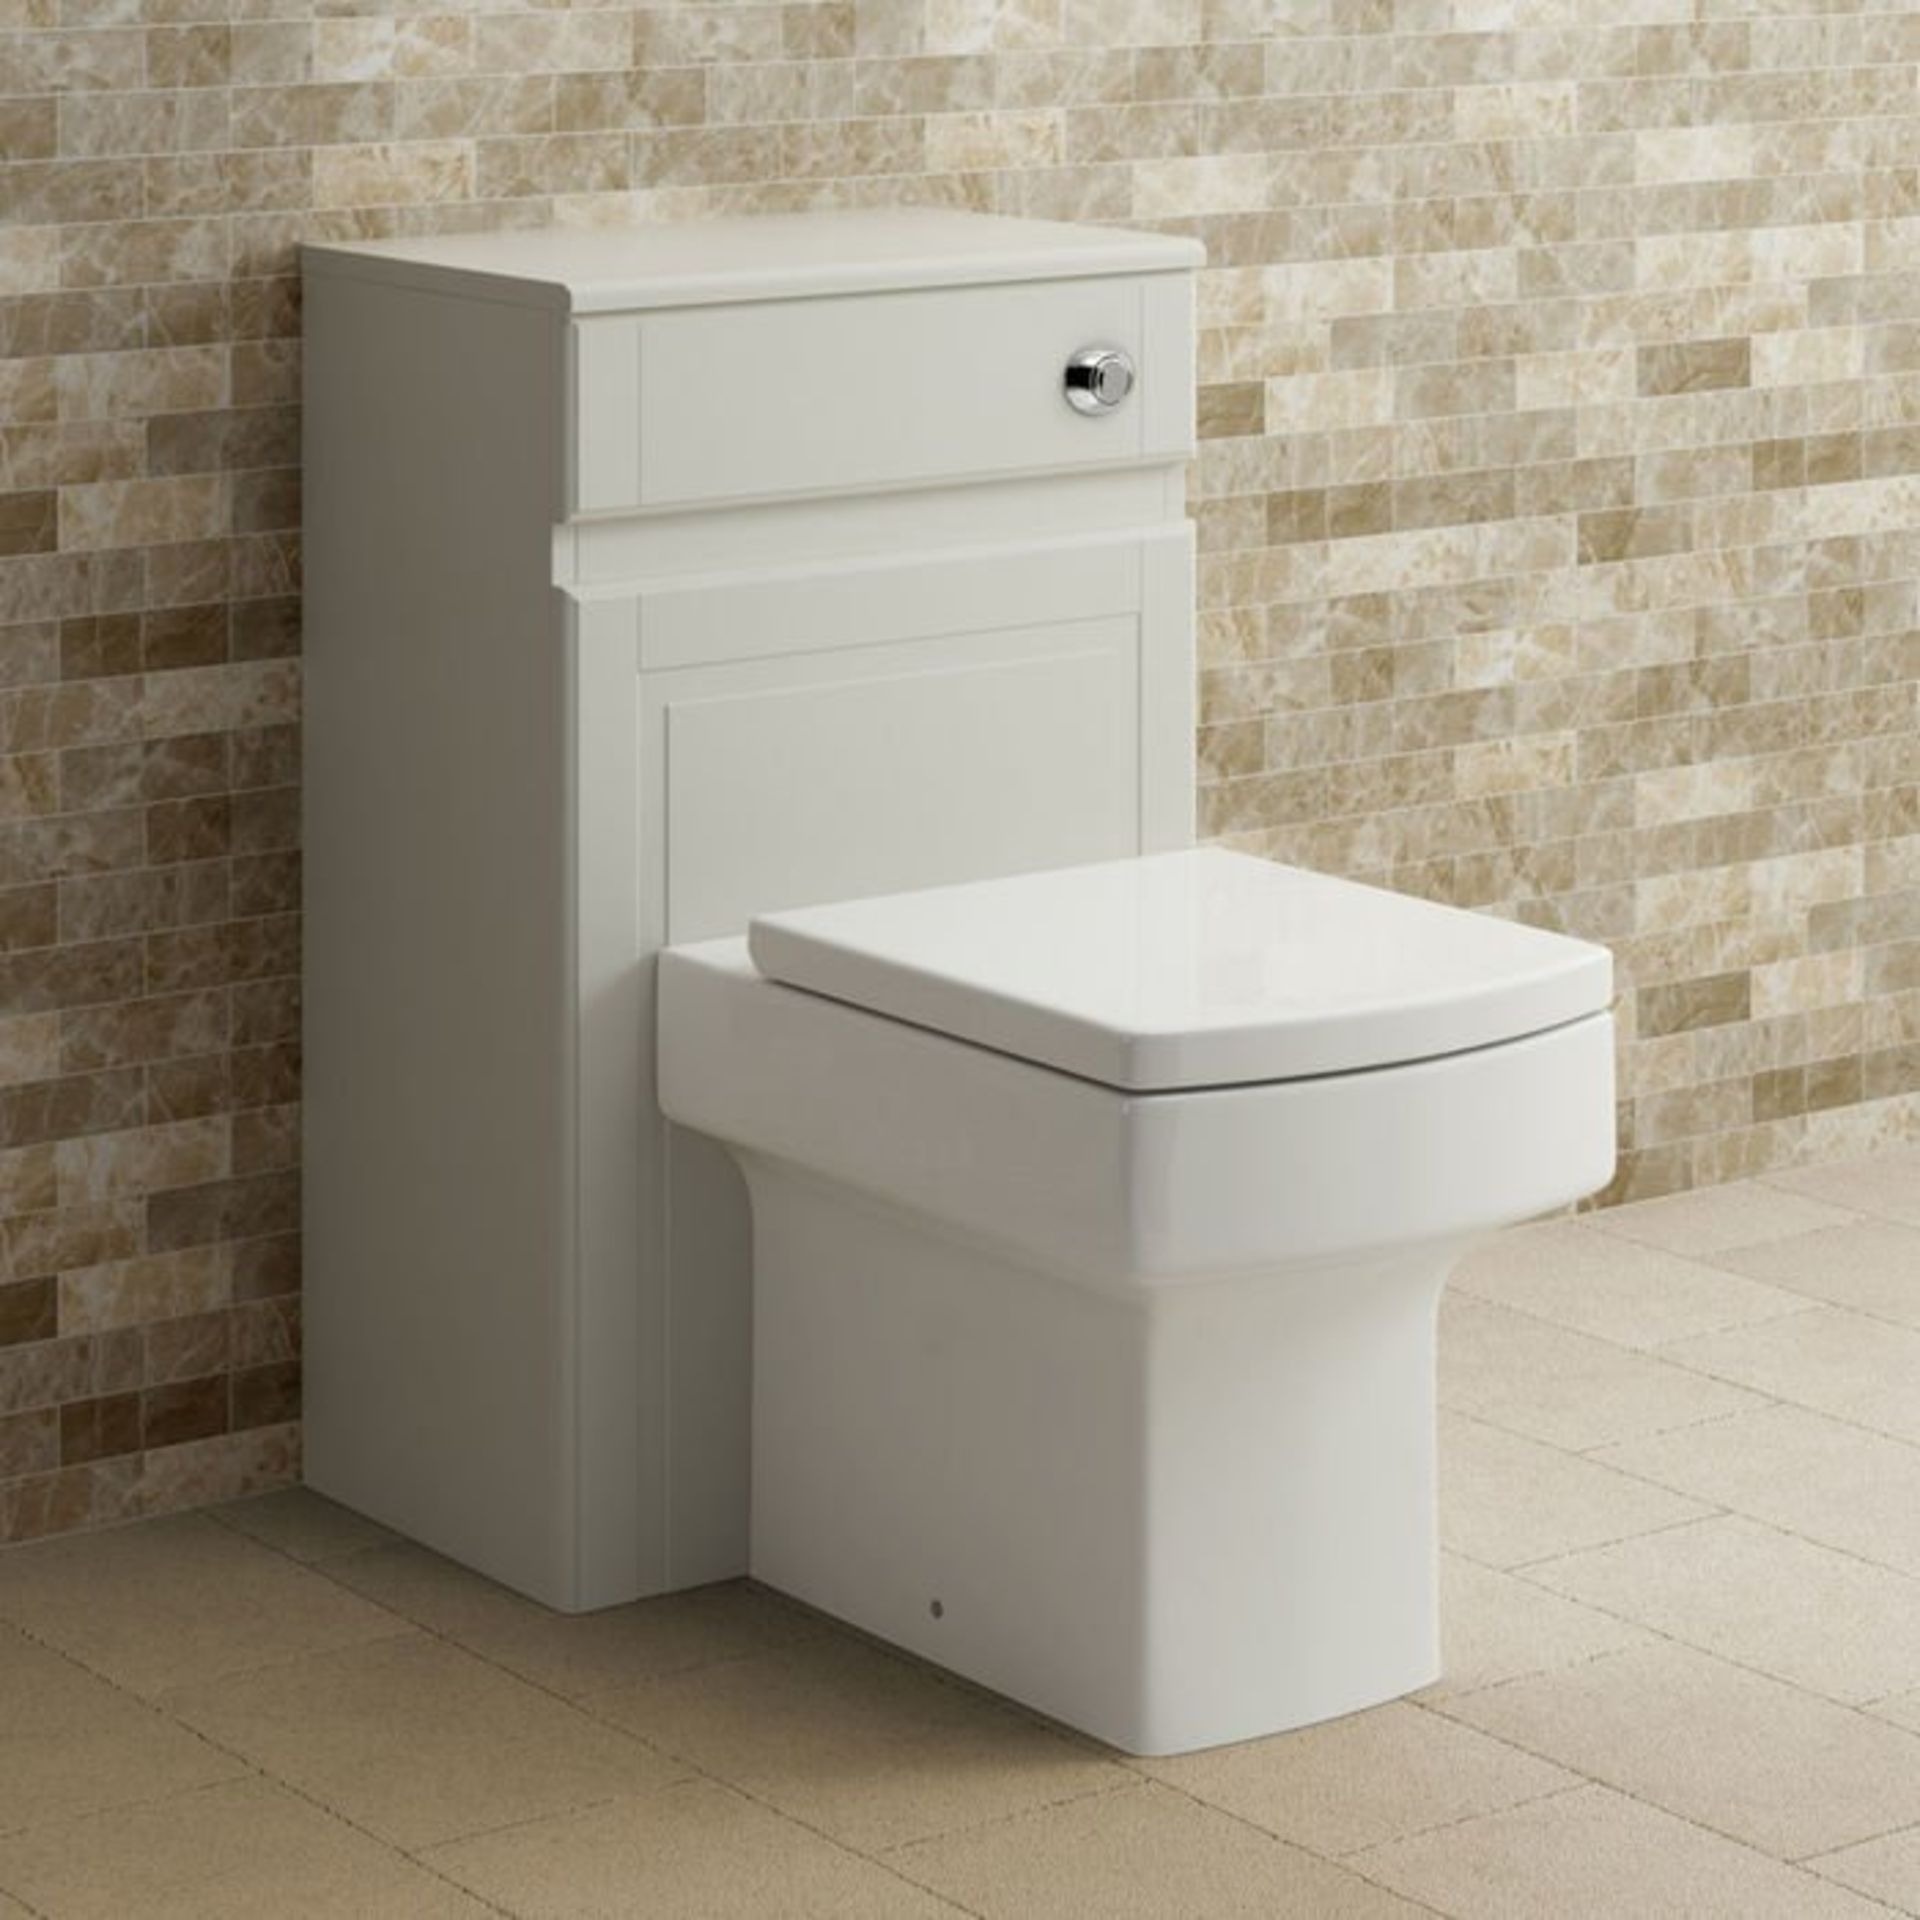 (L46) 500mm Cambridge Clotted Cream Back To Wall Toilet Unit RRP £199.99 Our discreet unit